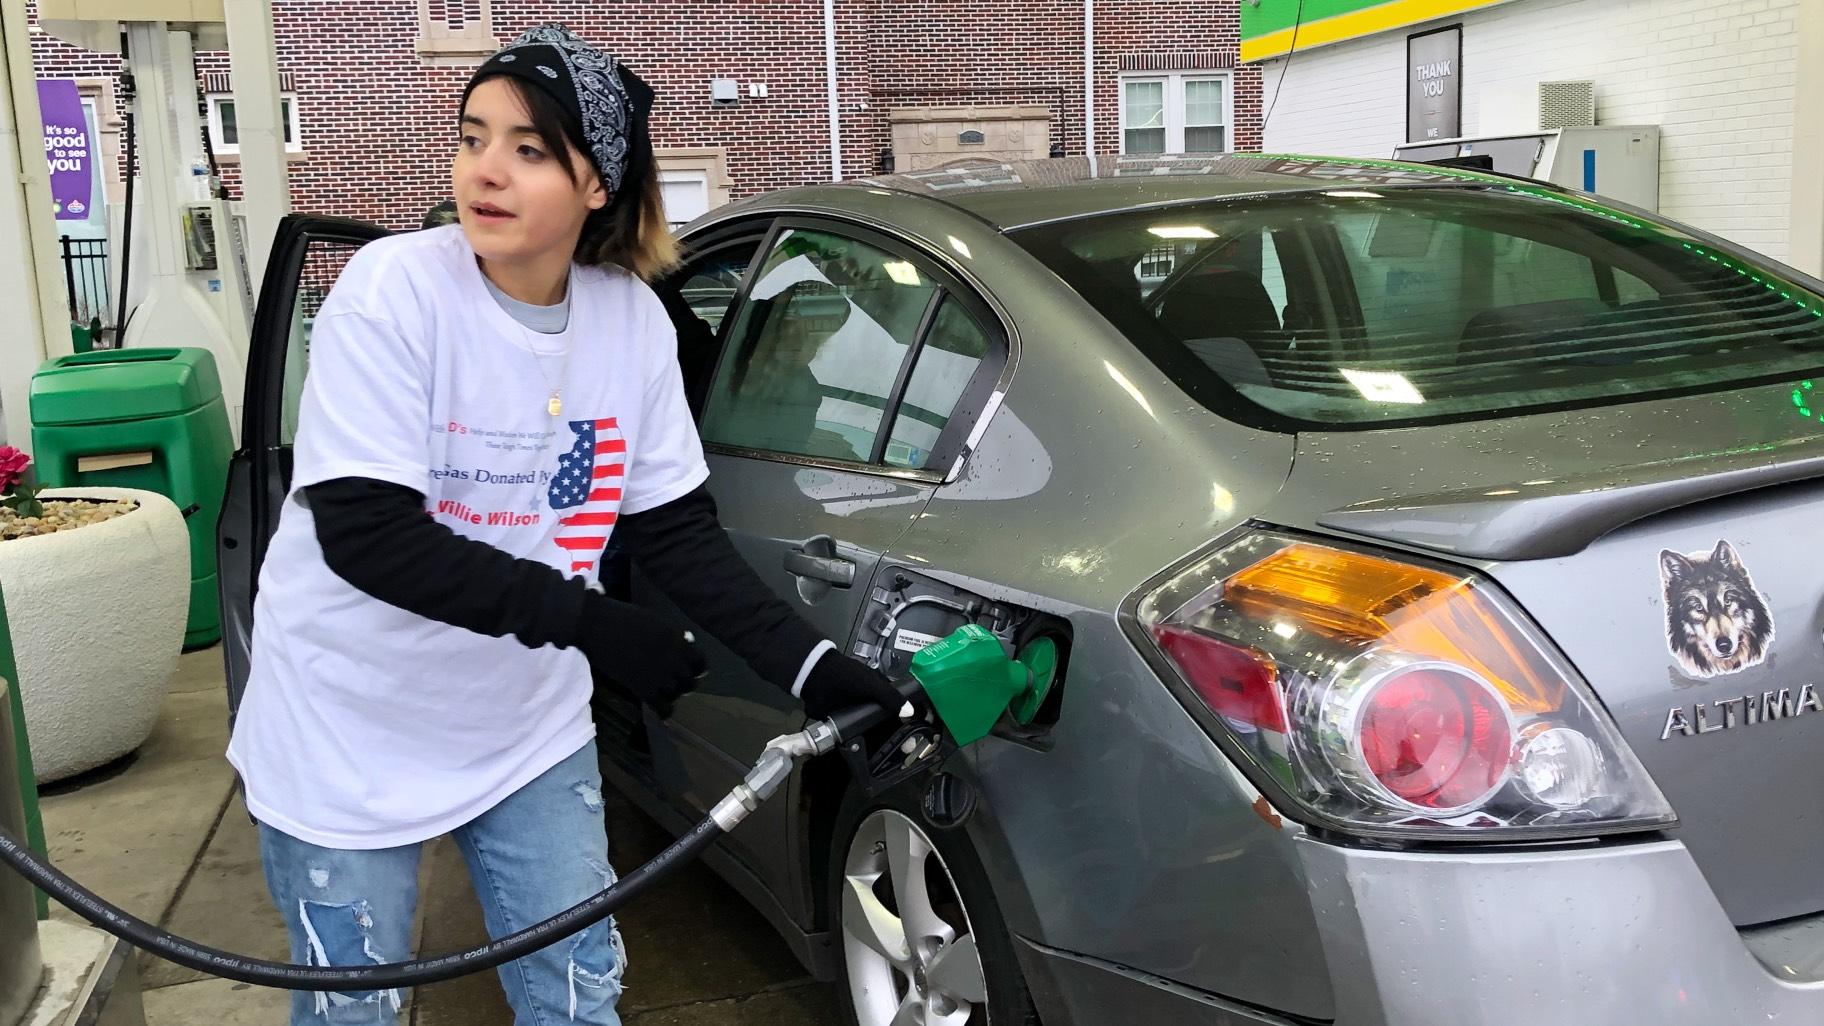 Volunteer Marissa Medina pumps gas at a BP station at Irving Park Road and Western Avenue during a giveaway, March 24, 2022. (Patty Wetli / WTTW News) 